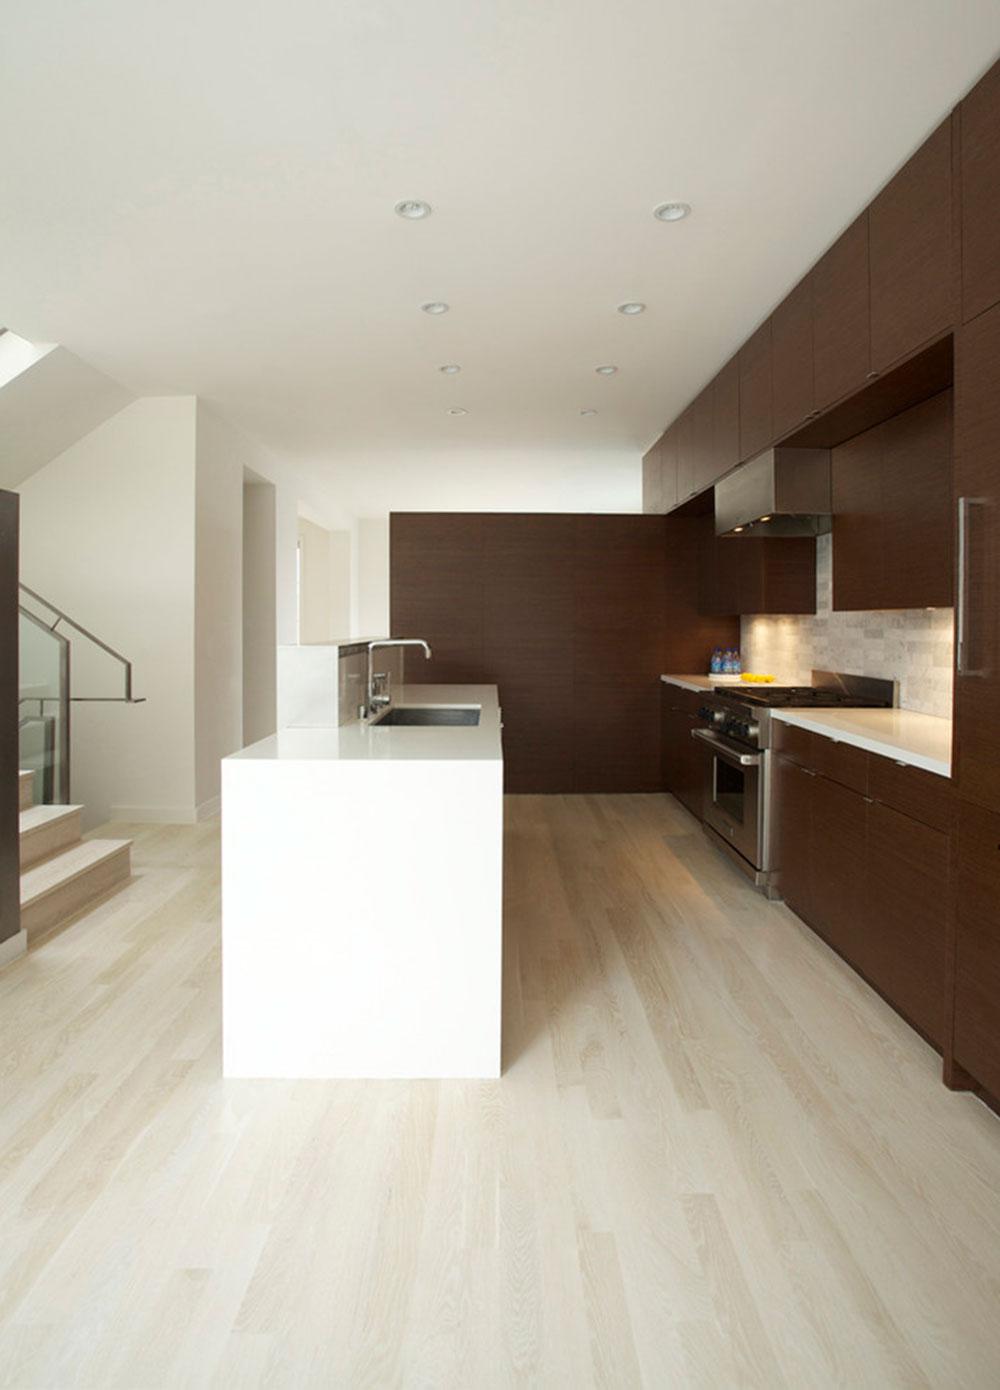 Guide to Choosing the Color of Hardwood Floor 4 Guide to Choosing the Color of Hardwood Floor